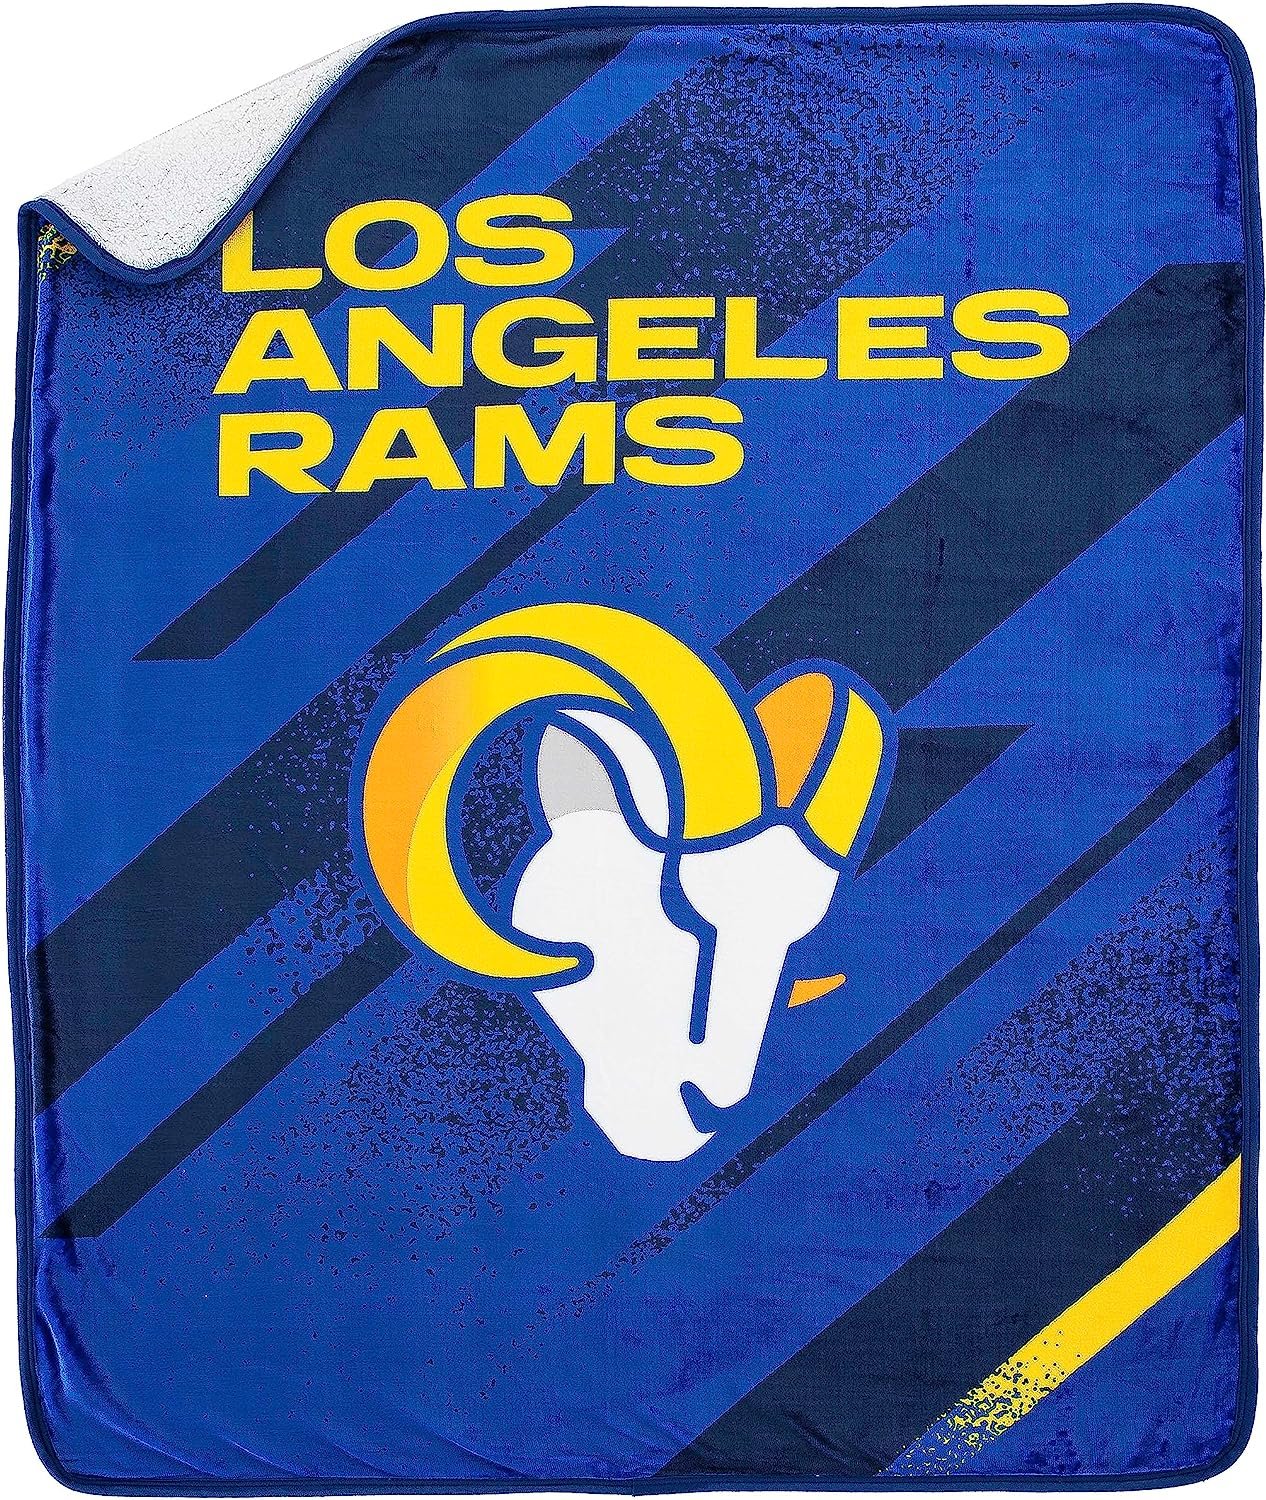 Los Angeles Rams Throw Blanket, Sherpa Raschel Polyester, Silk Touch Style, Velocity Design, 50x60 Inch